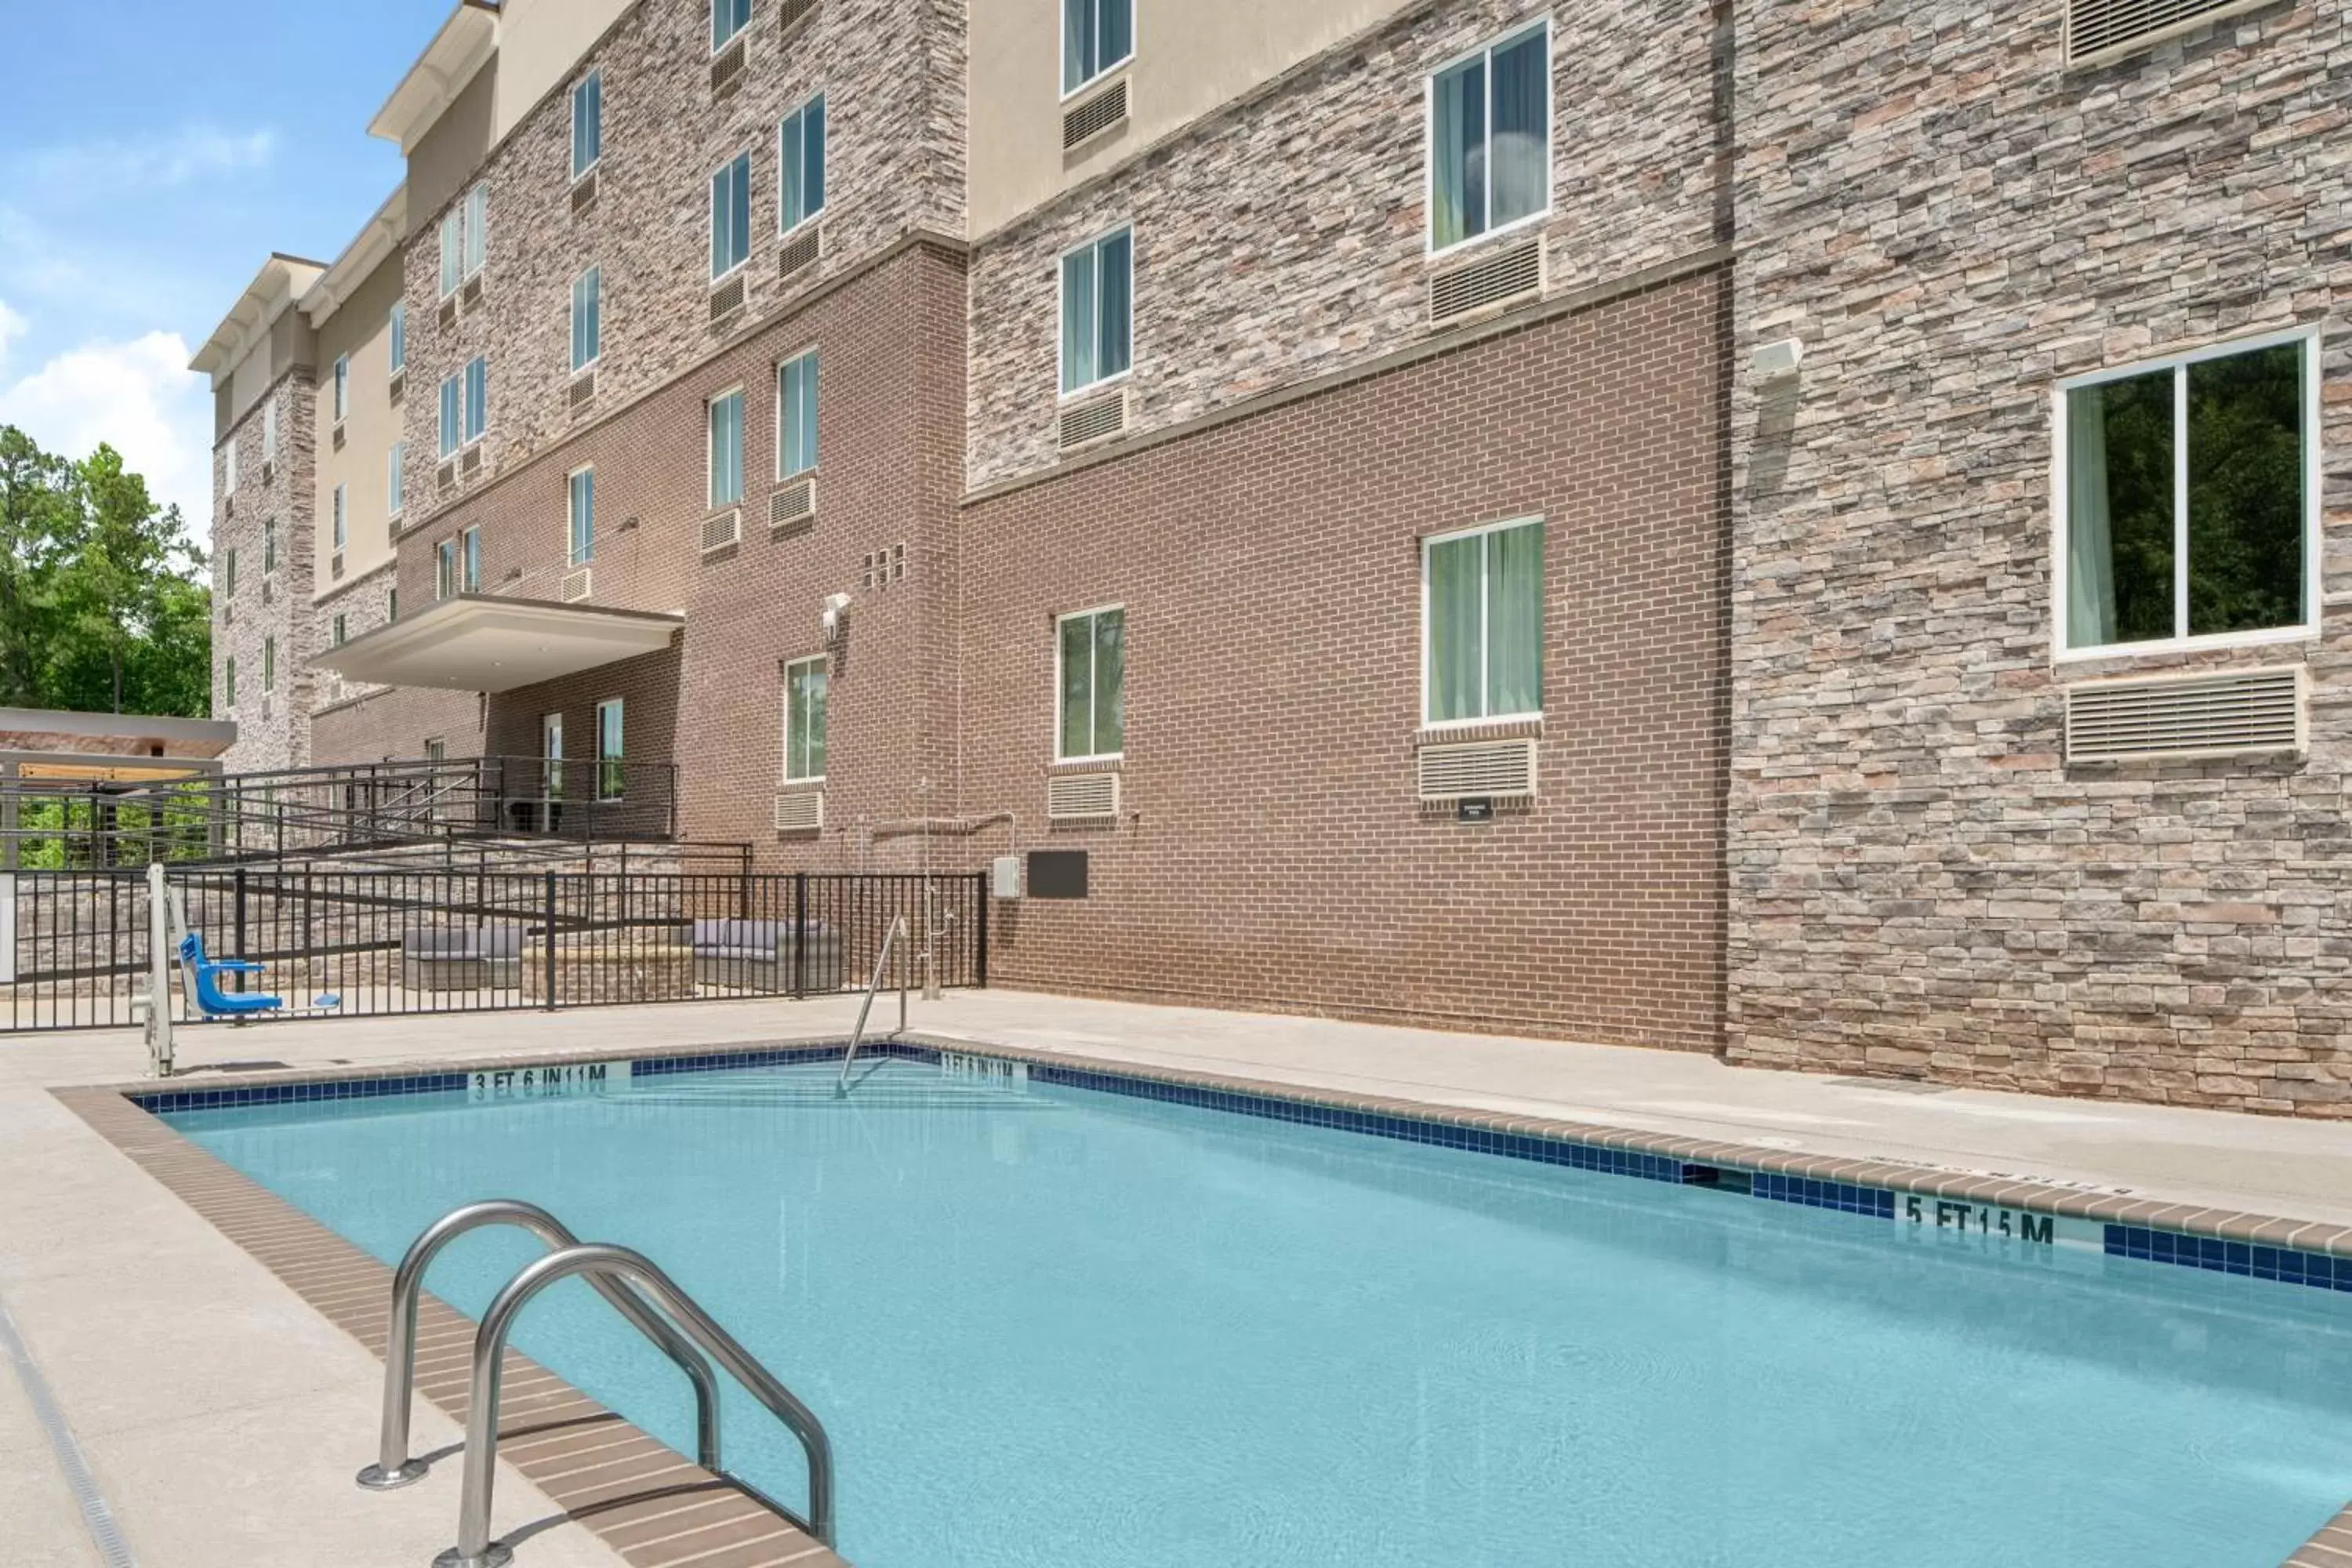 Swimming pool, Property Building in Candlewood Suites - Newnan - Atlanta SW, an IHG Hotel